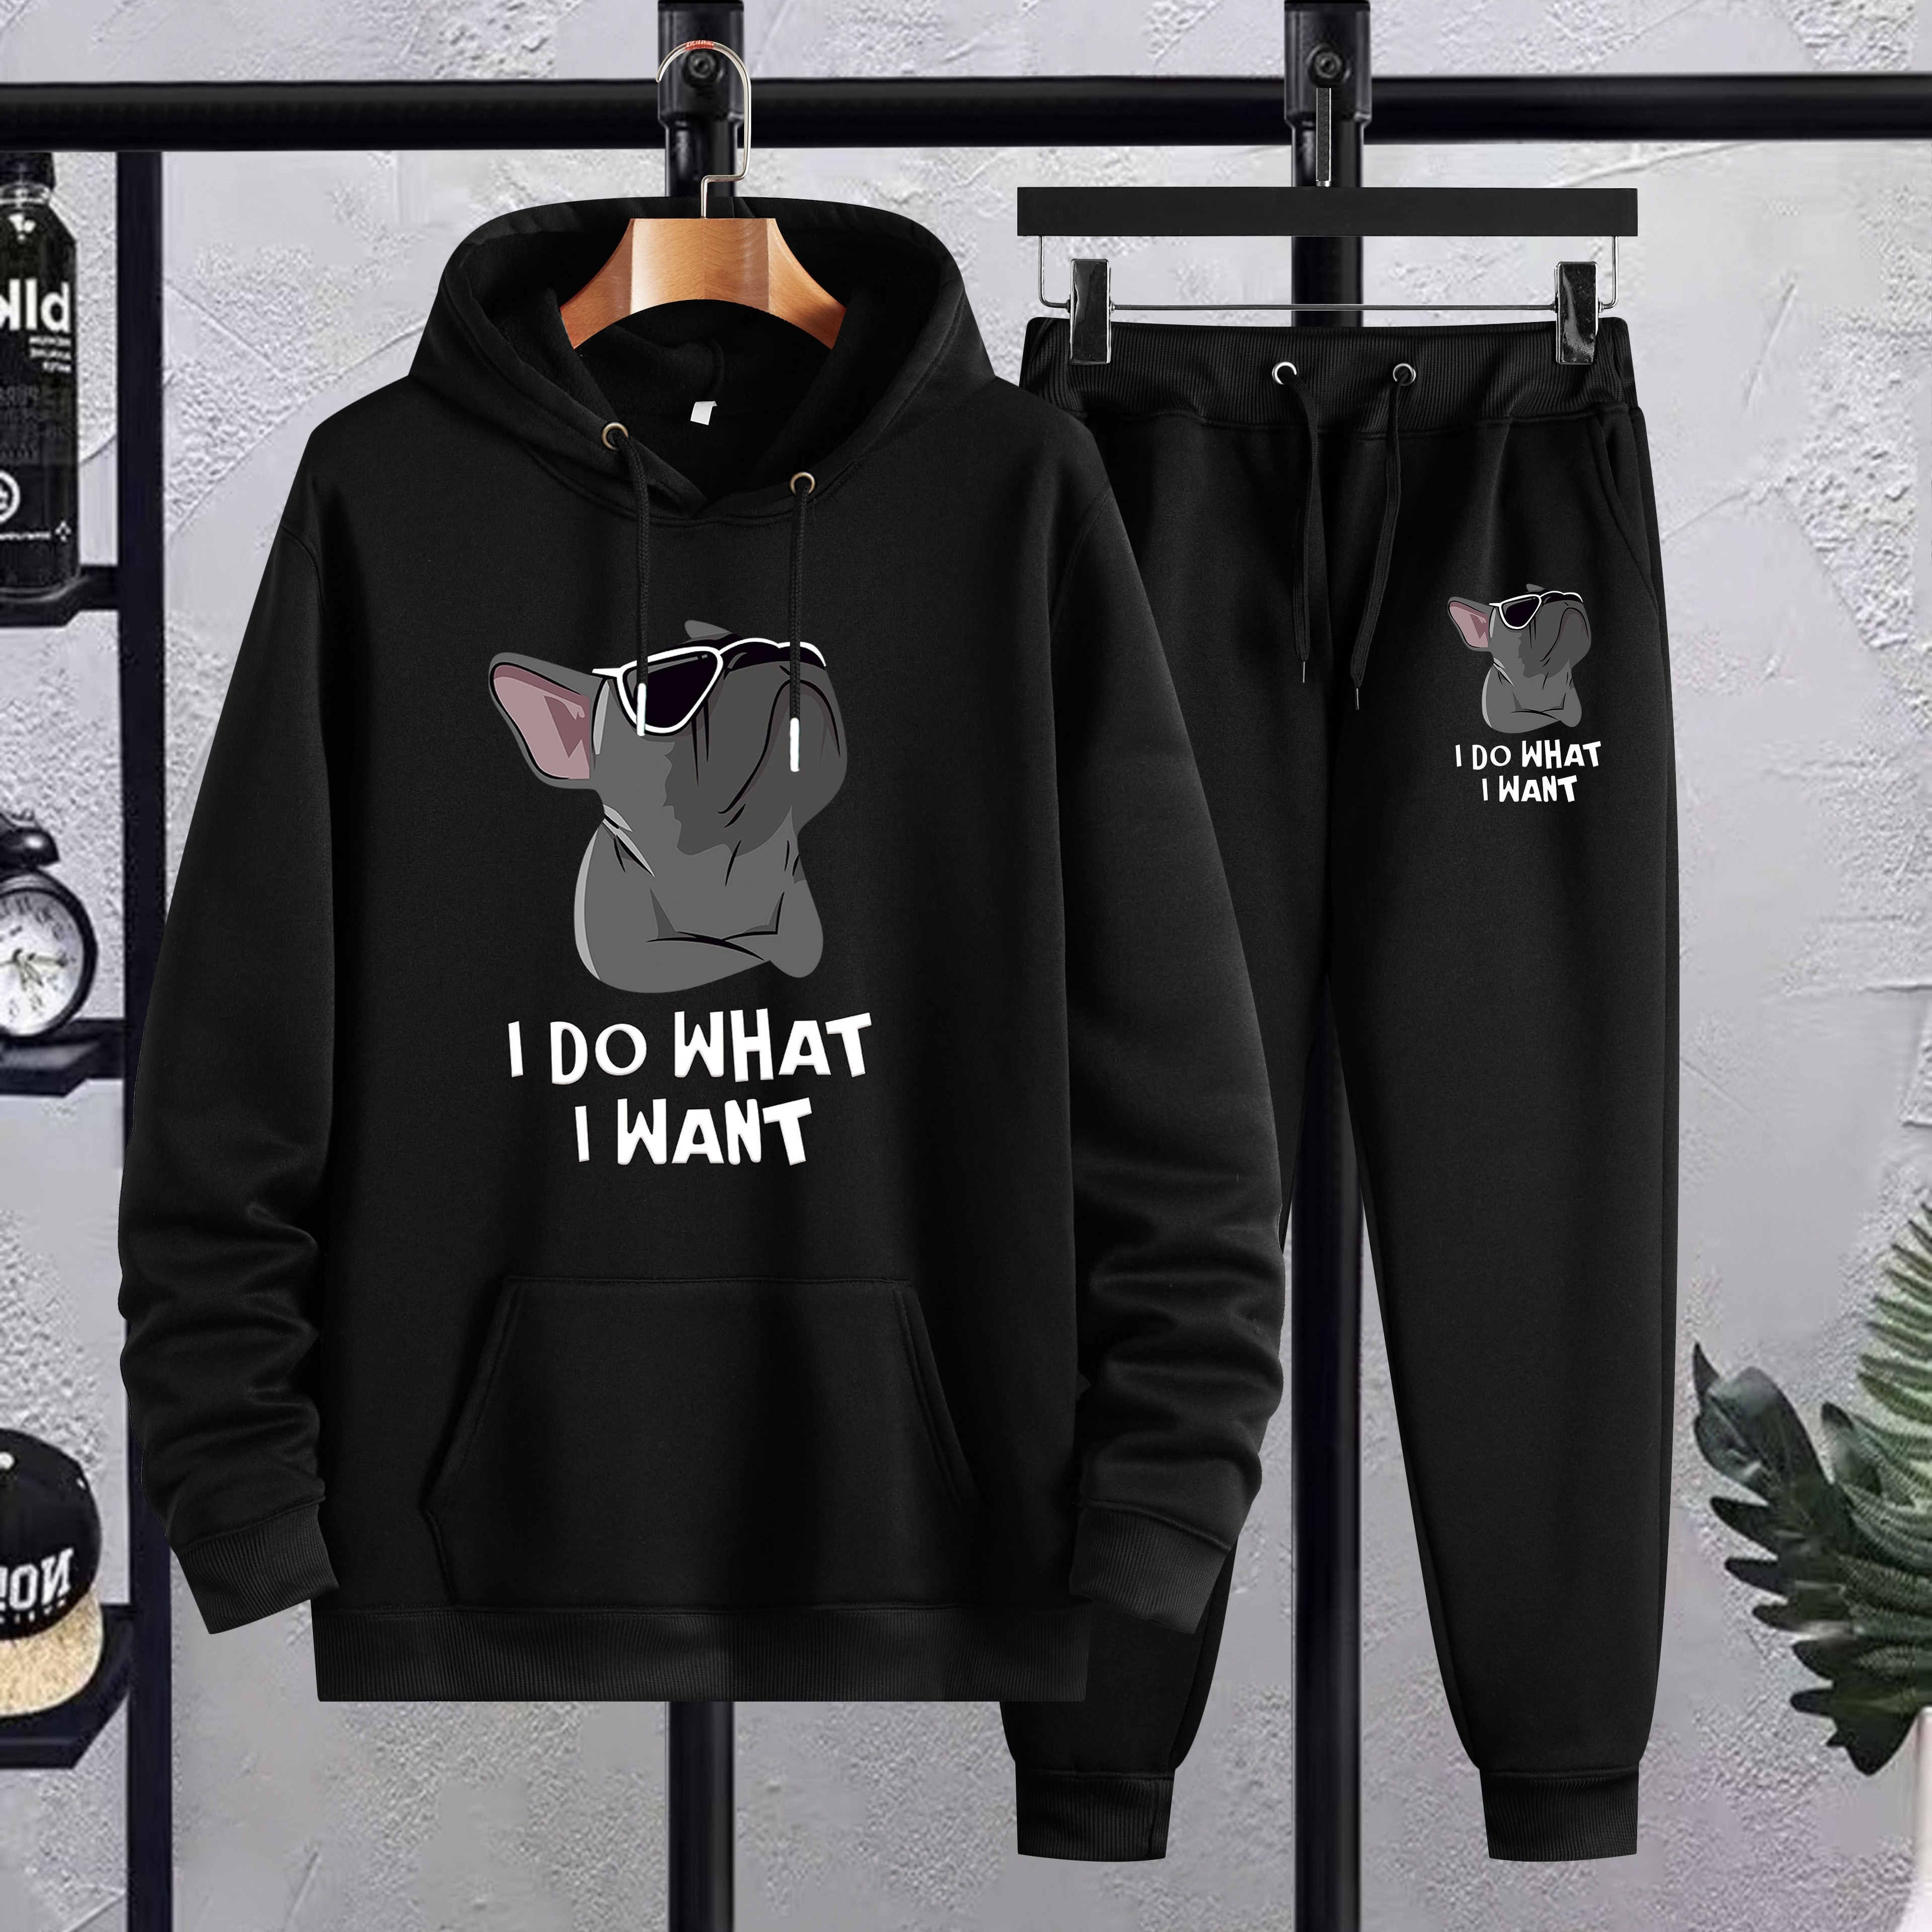 

Plus Size Men's "i Do What I Want" Print Hooded Sweatshirt & Sweatpants Set For Spring Fall Winter, Men's Clothing